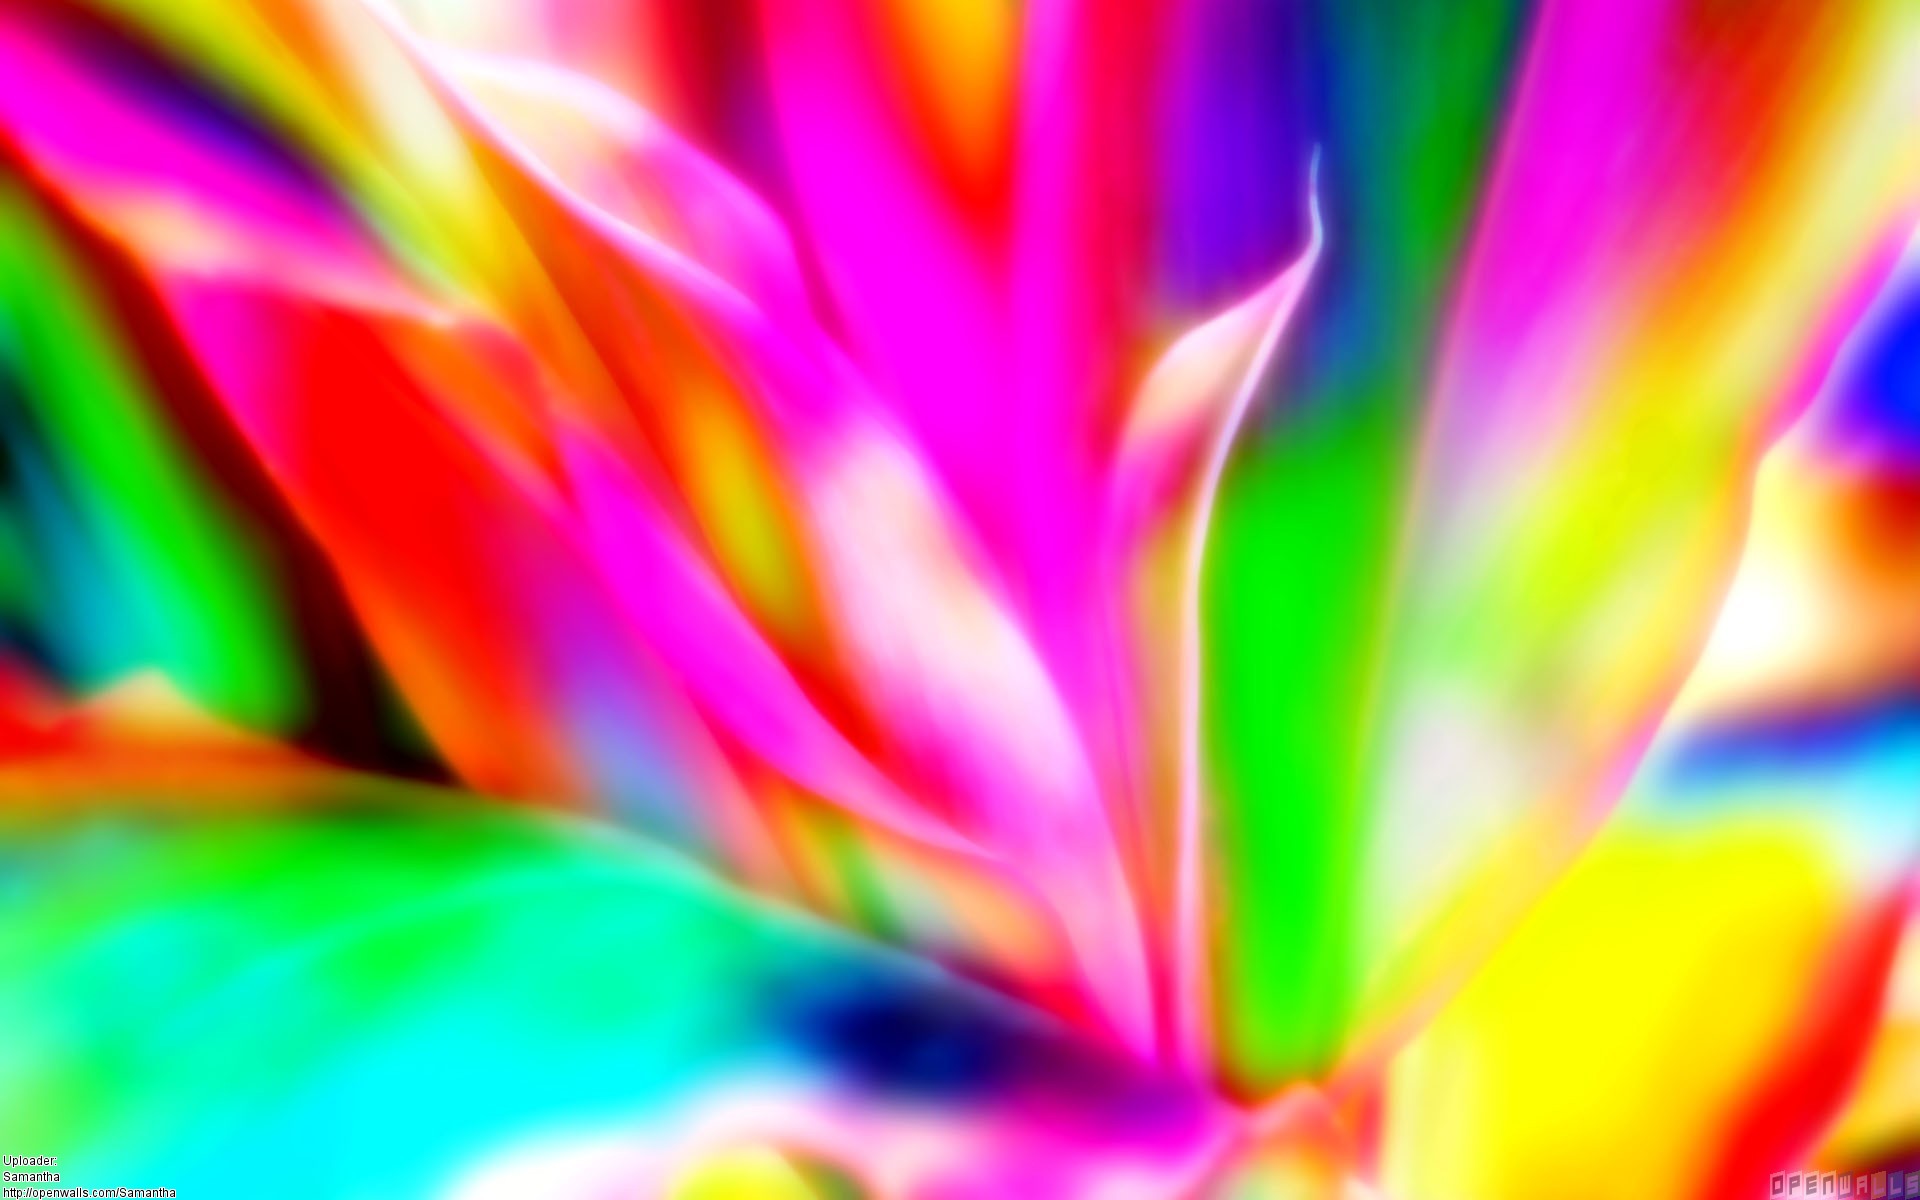 background image colorful images wallpaper 1920x1200 1920x1200